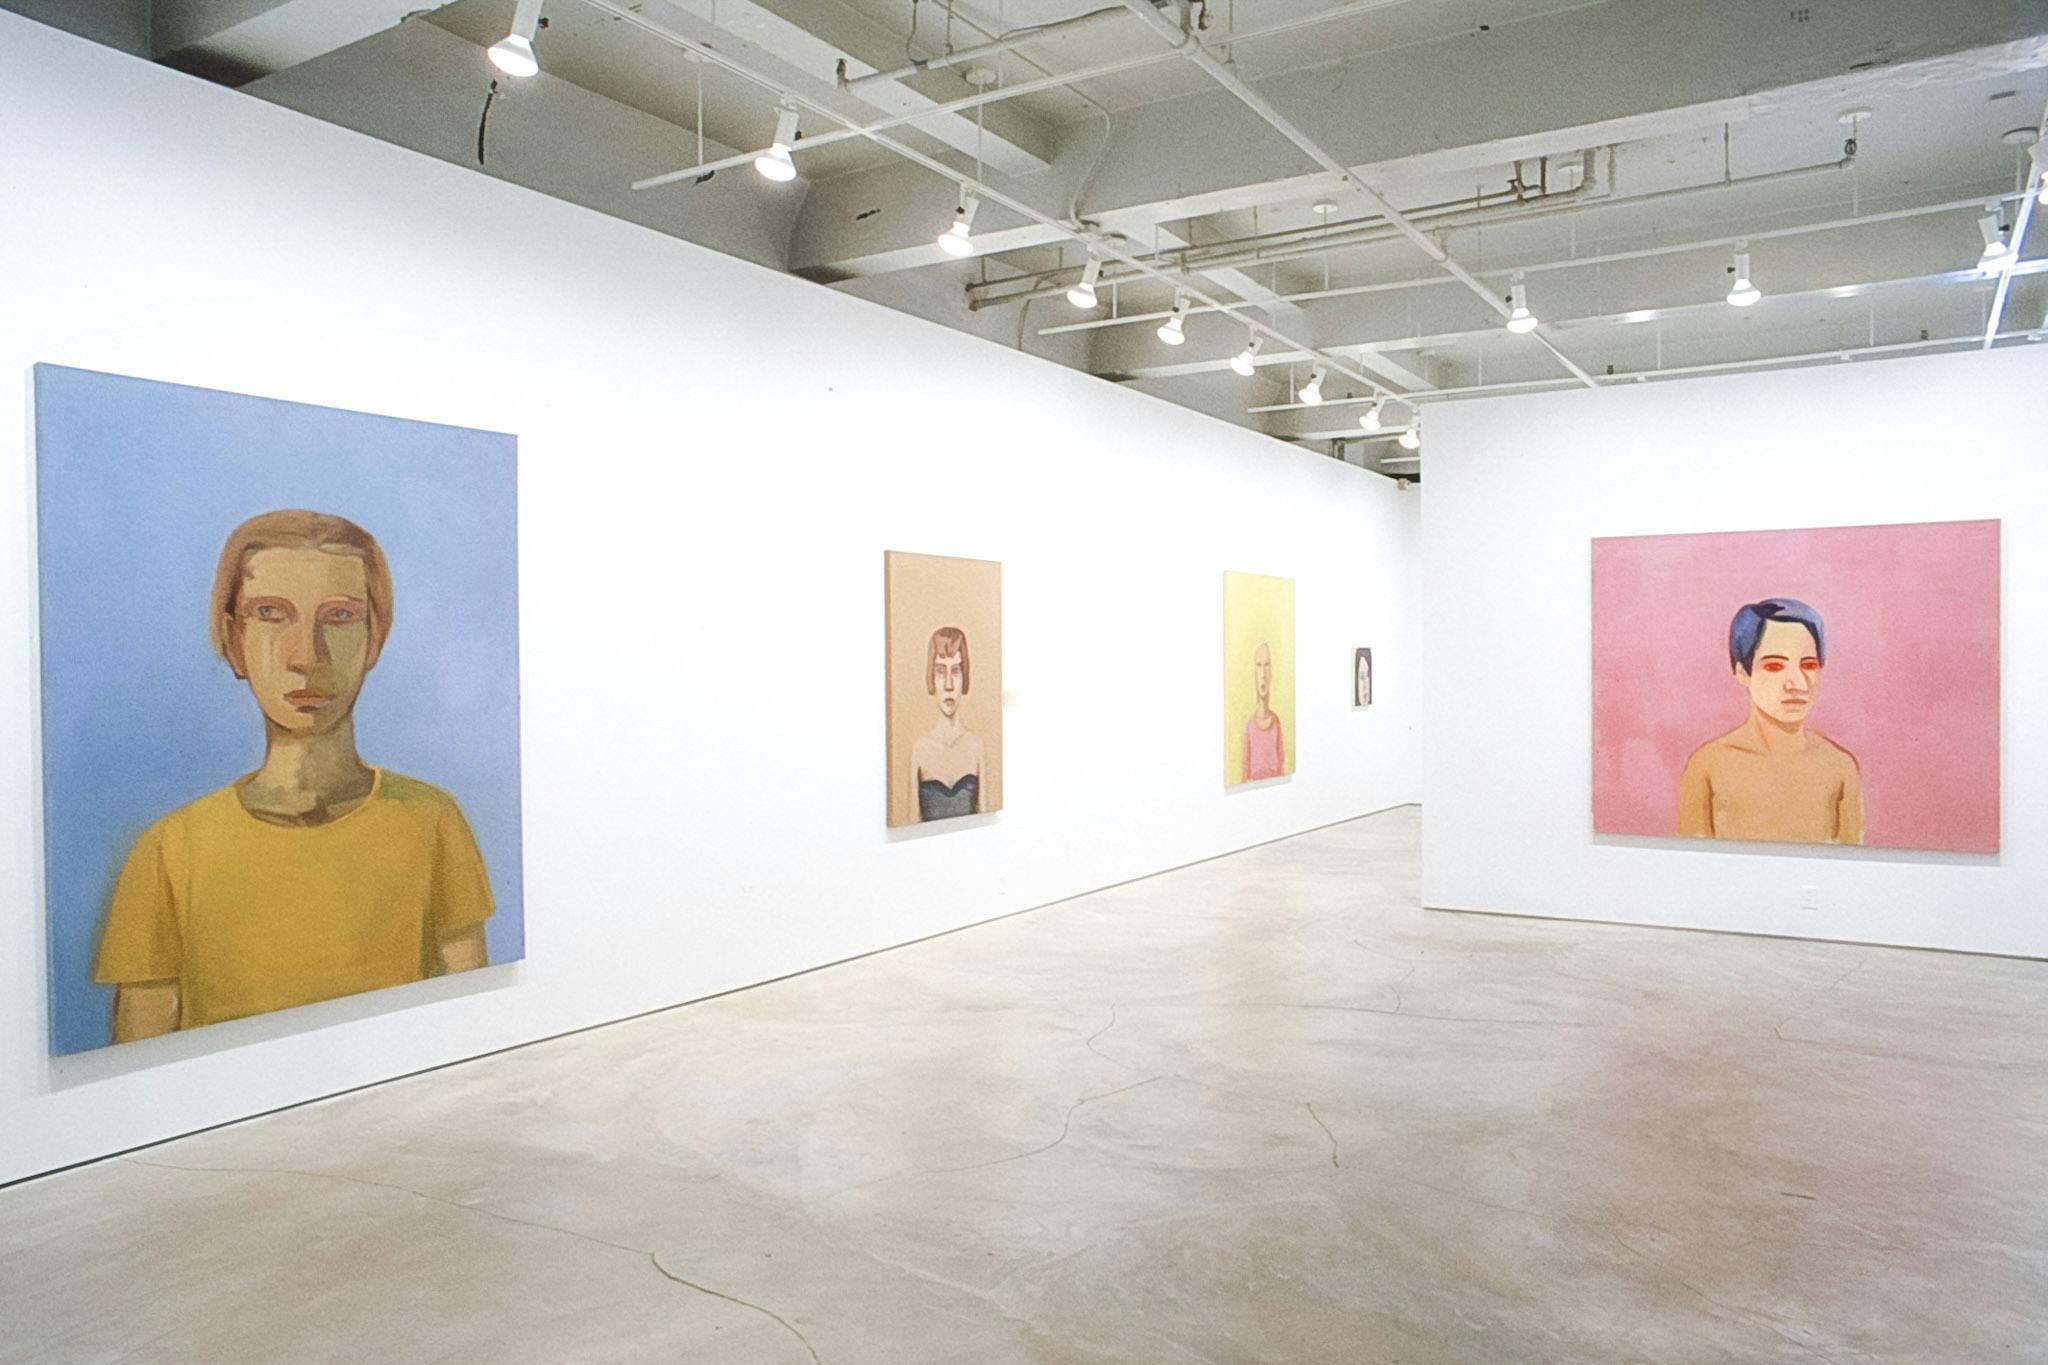 Five portrait paintings are visible in this photograph. The large-sized painting on the left depicts a man in a yellow T-shirt standing in a blue background. His eyes are looking away. 